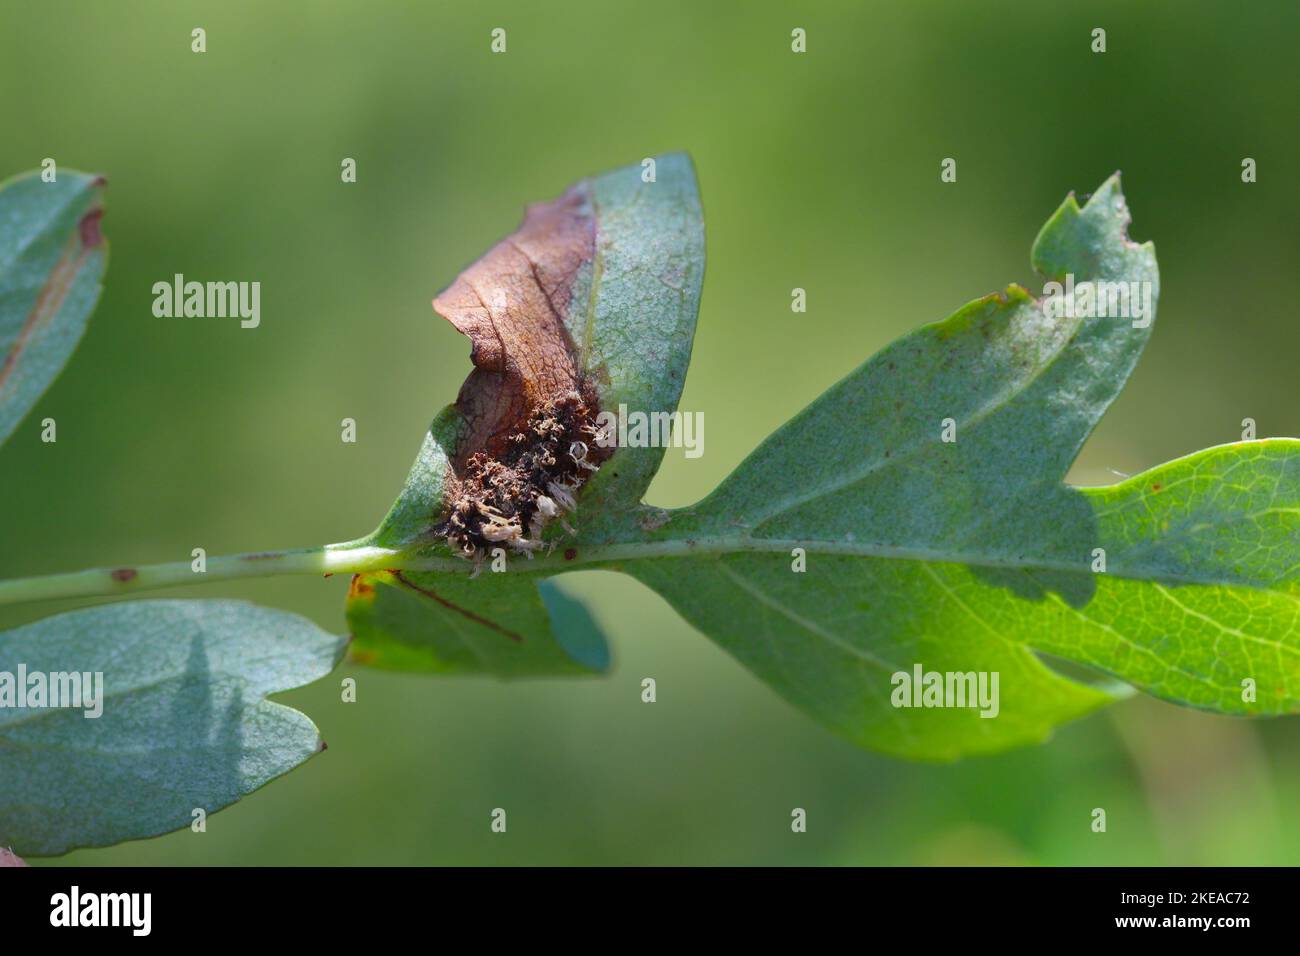 Symptoms of the fungal disease - rust on hawthorn leaves. Stock Photo